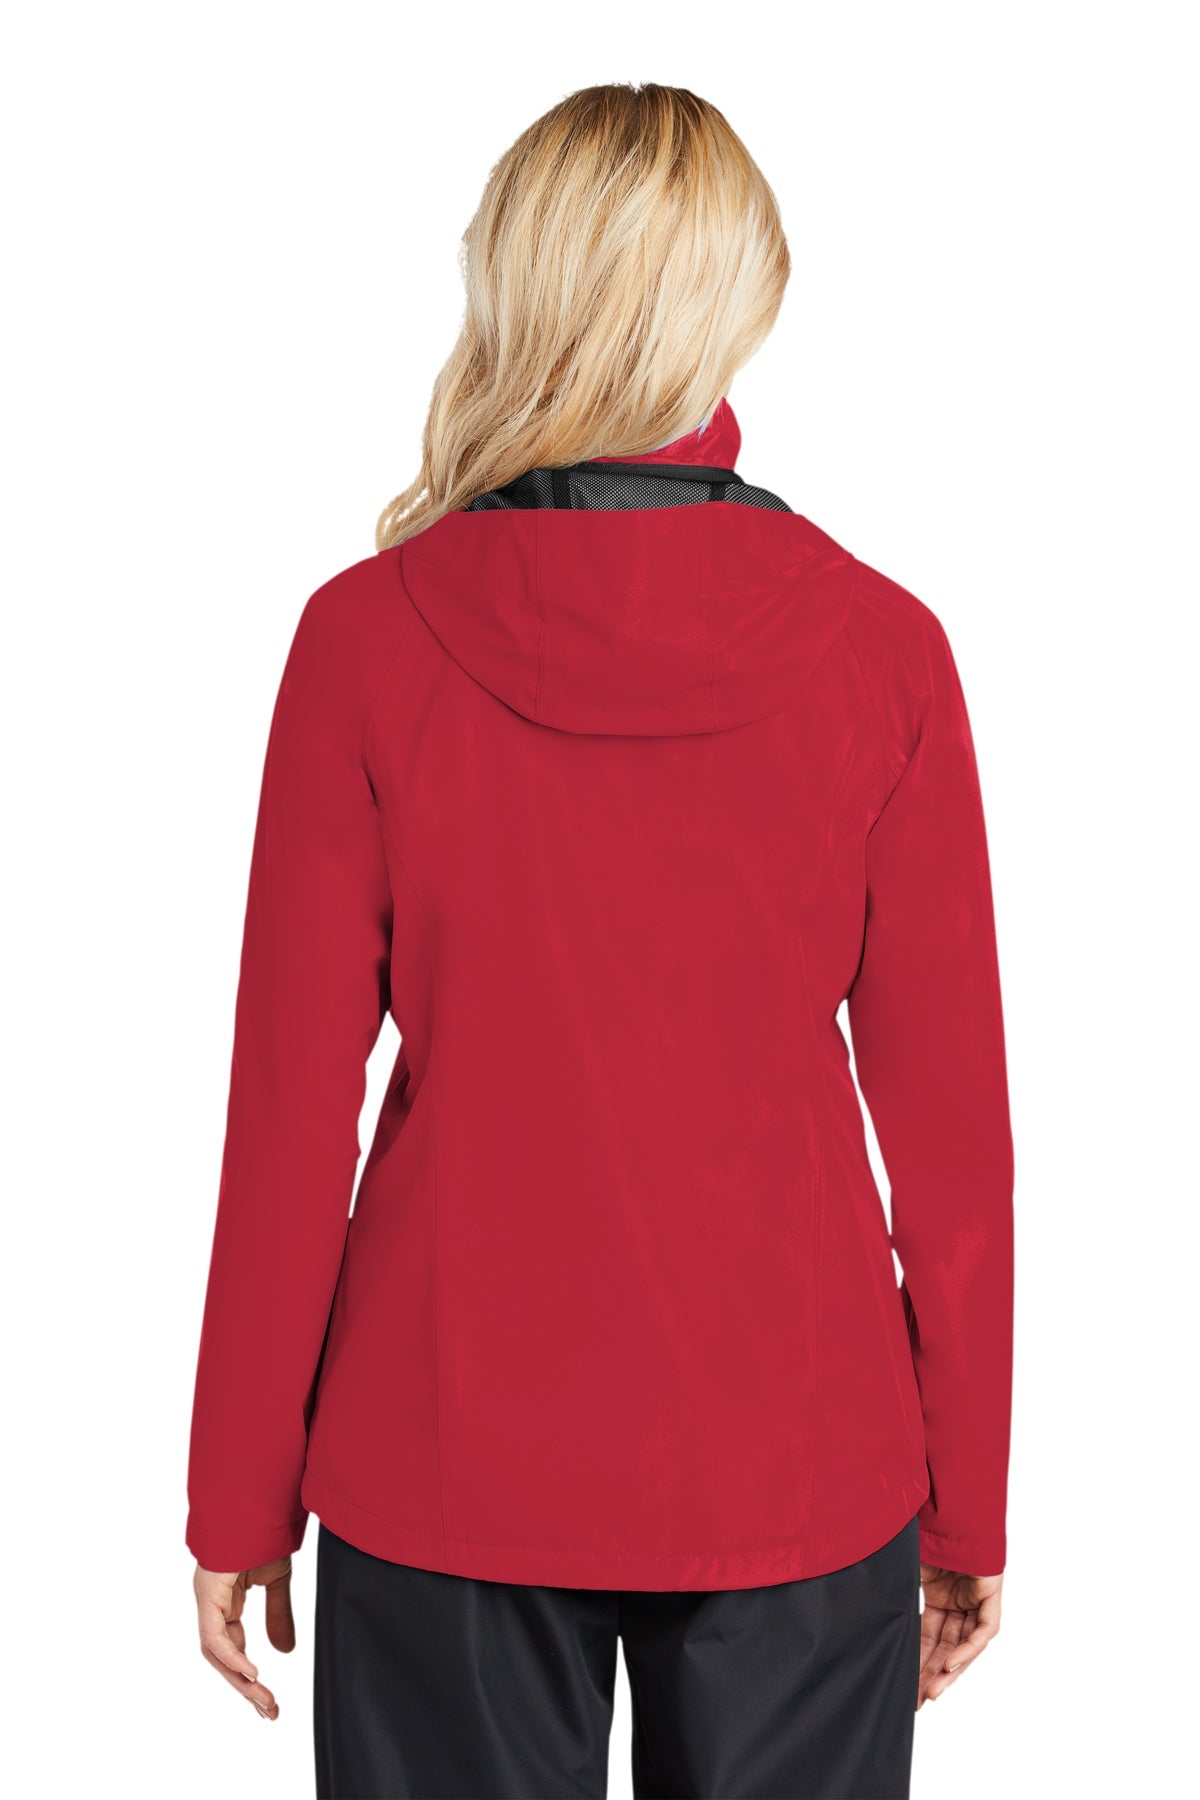 Port Authority Ladies Torrent Customized Waterproof Jackets, Engine Red